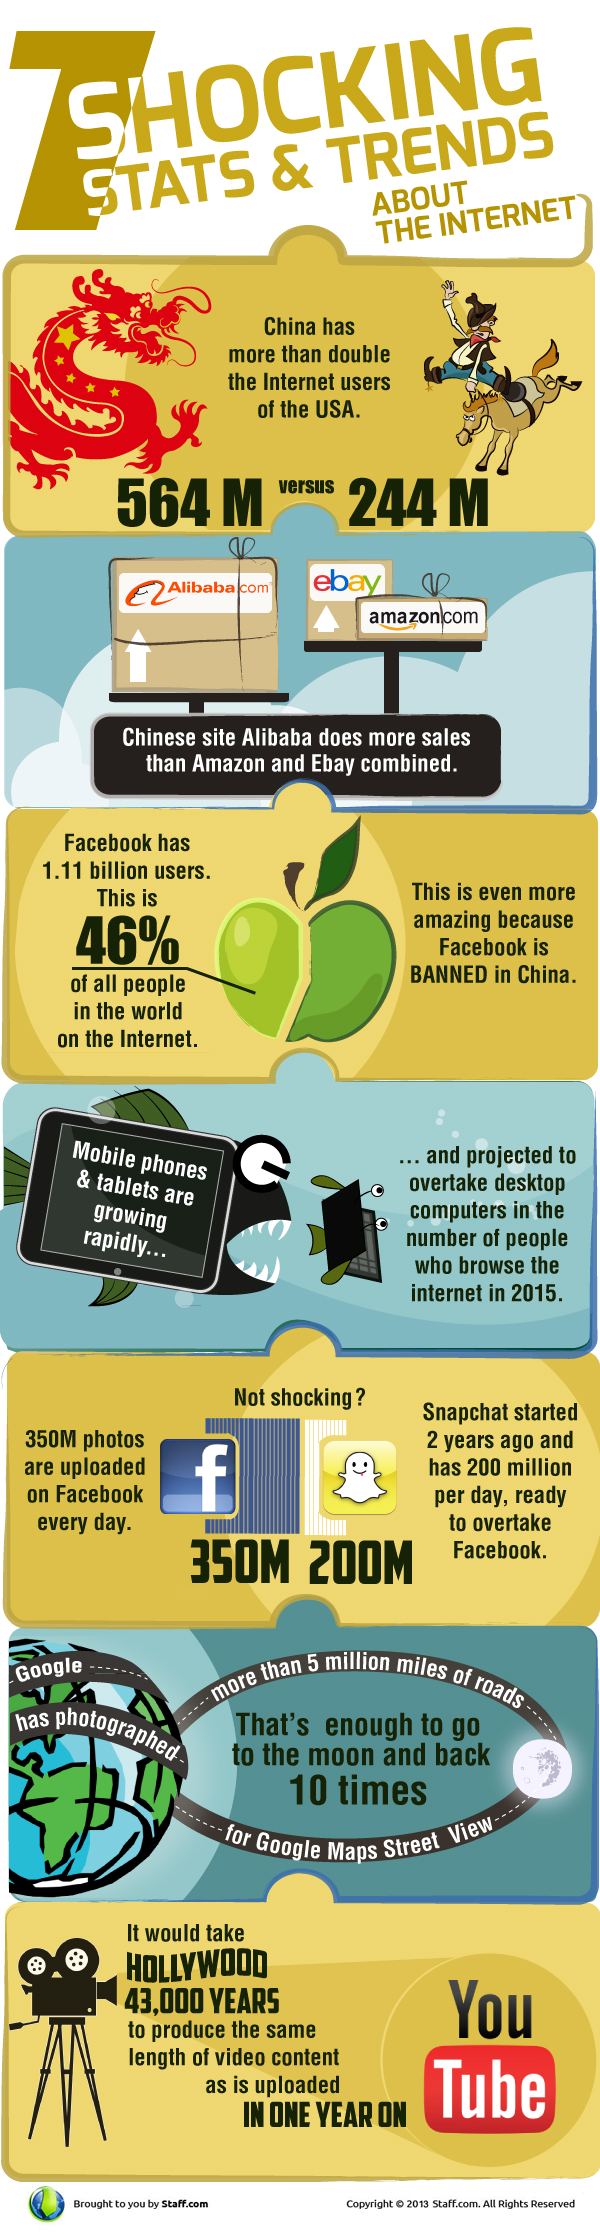 Seven Shocking Stats & Trends about the Internet